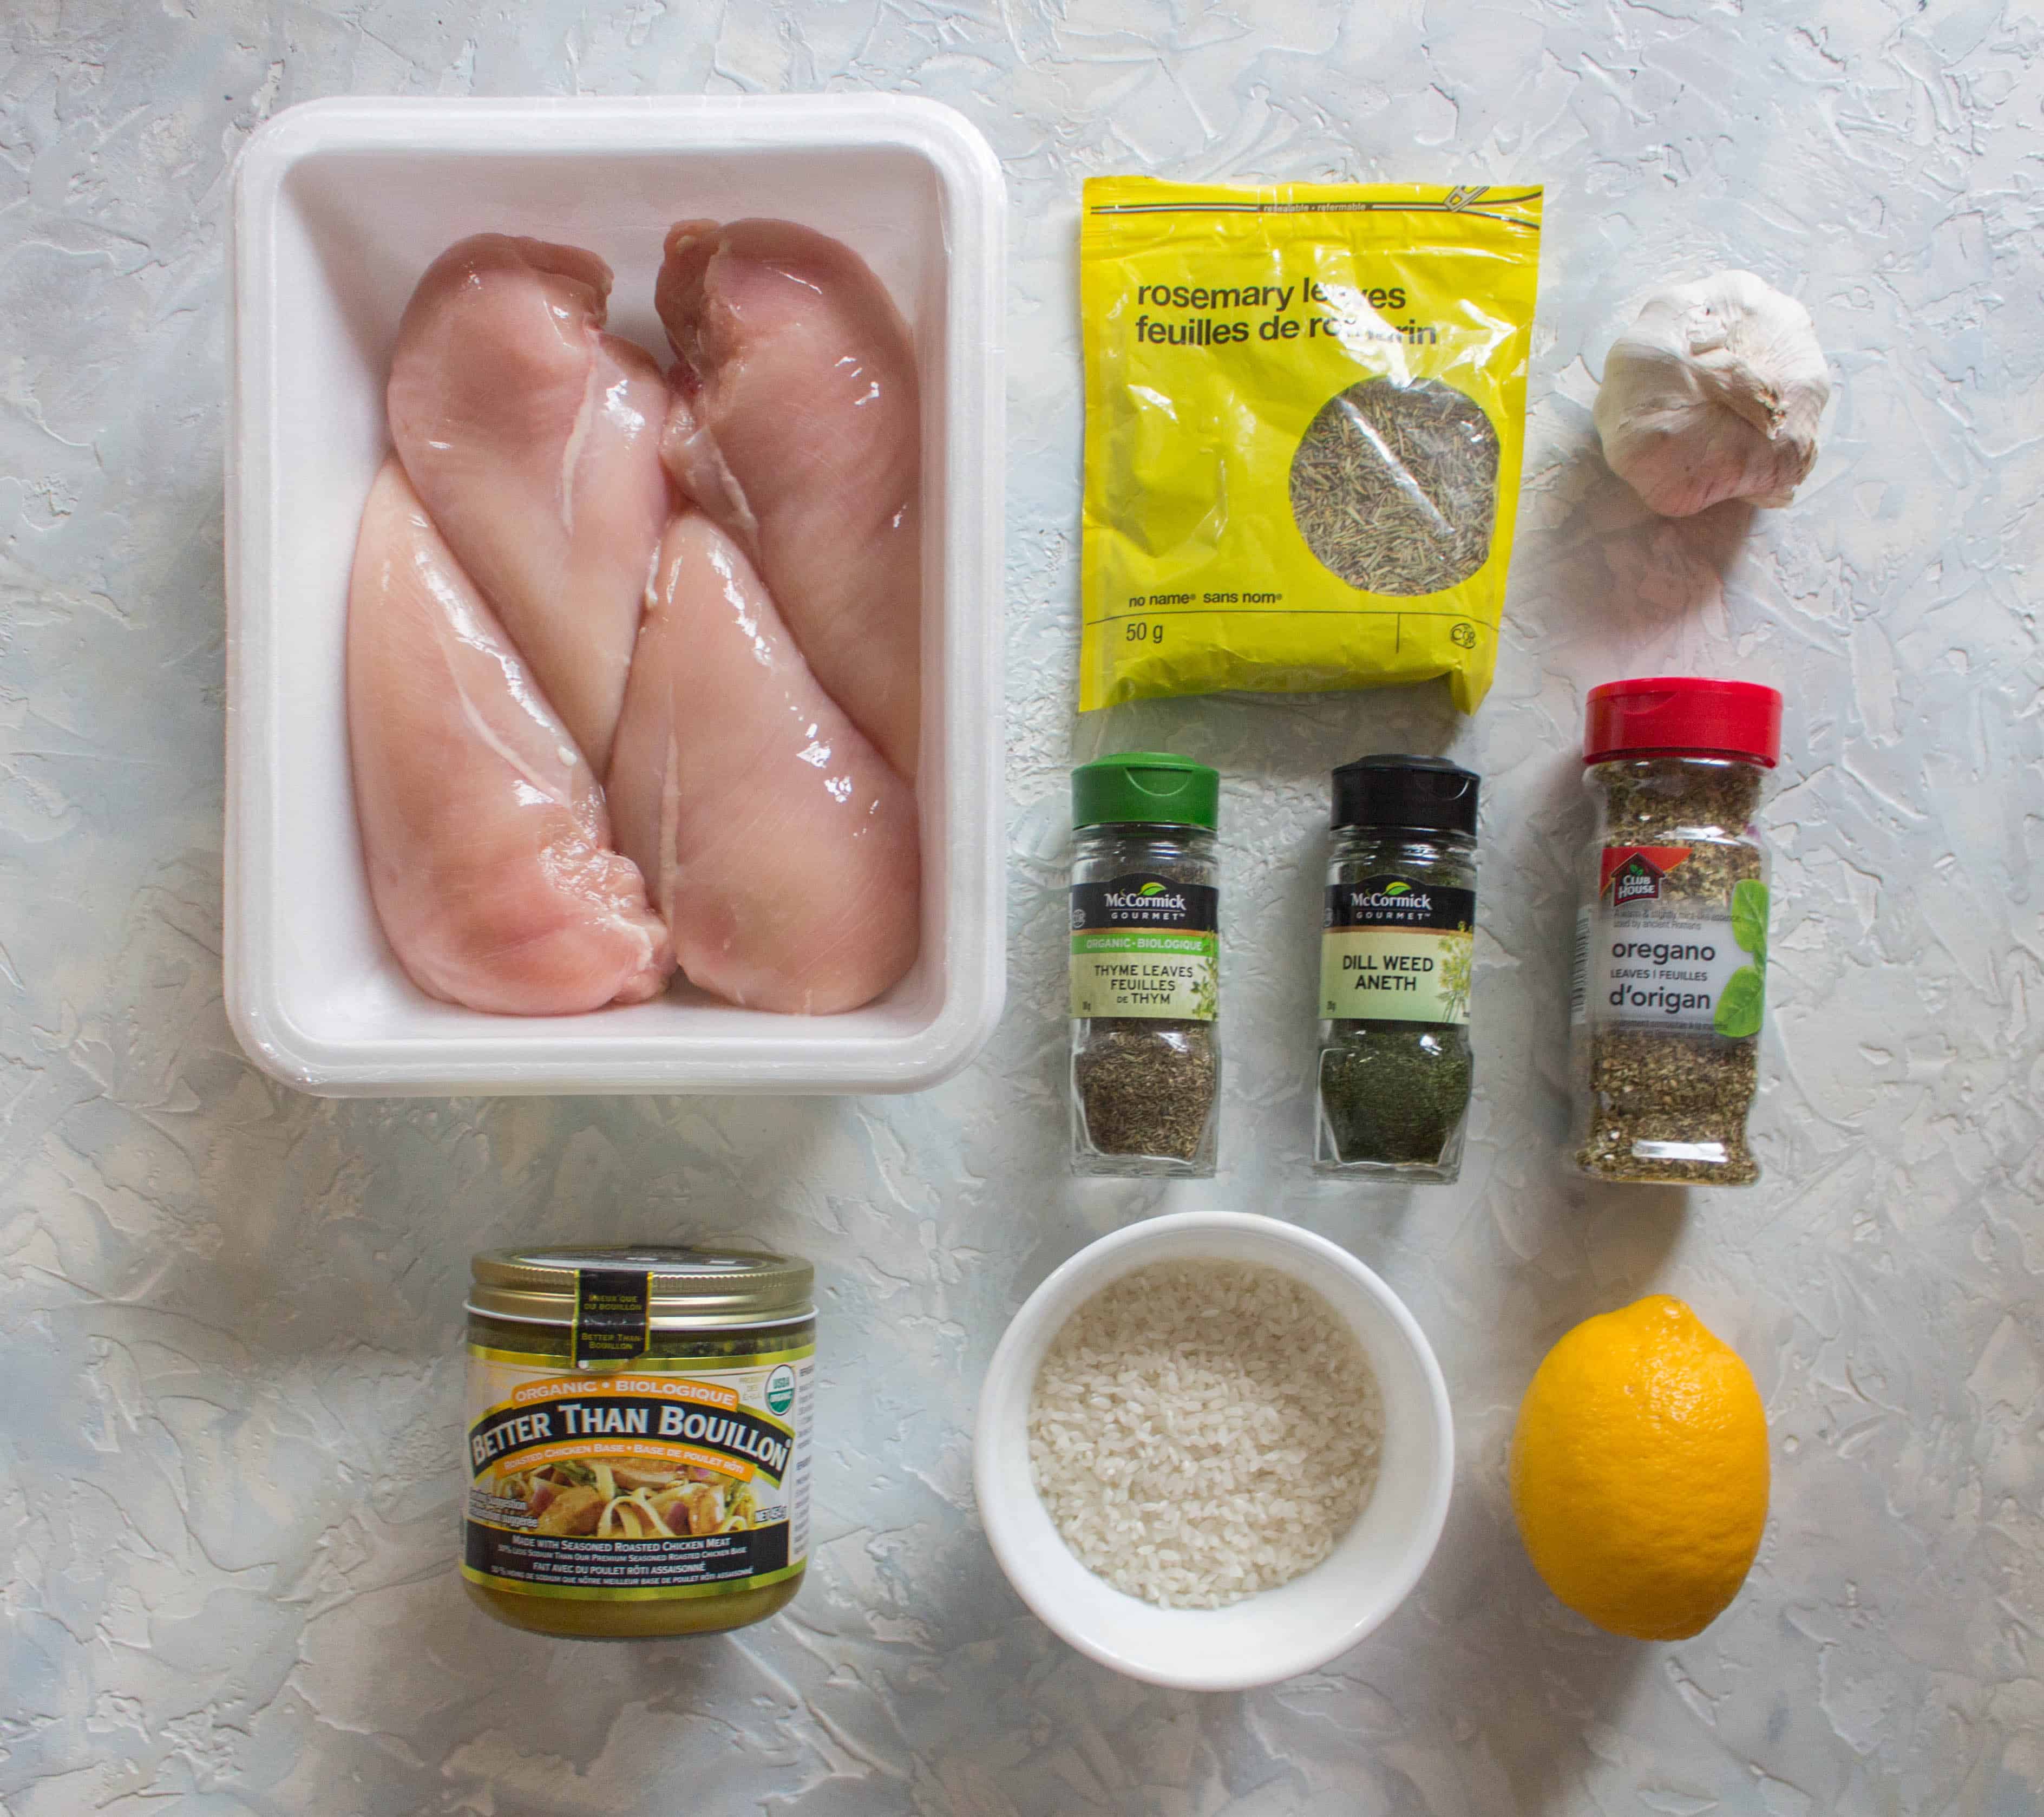 This Healthy Greek Chicken Instant Pot Meal Prep Recipe is the perfect meal prep for the week! This Greek Chicken recipe is so quick and easy, you’re going to want to make all the time because it takes just a few spices and a couple of minutes to make! Non-Instant Pot instructions are down below if you don't have an Instant Pot! #Instantpot #easyrecipe #greekchicken #chickenrecipe